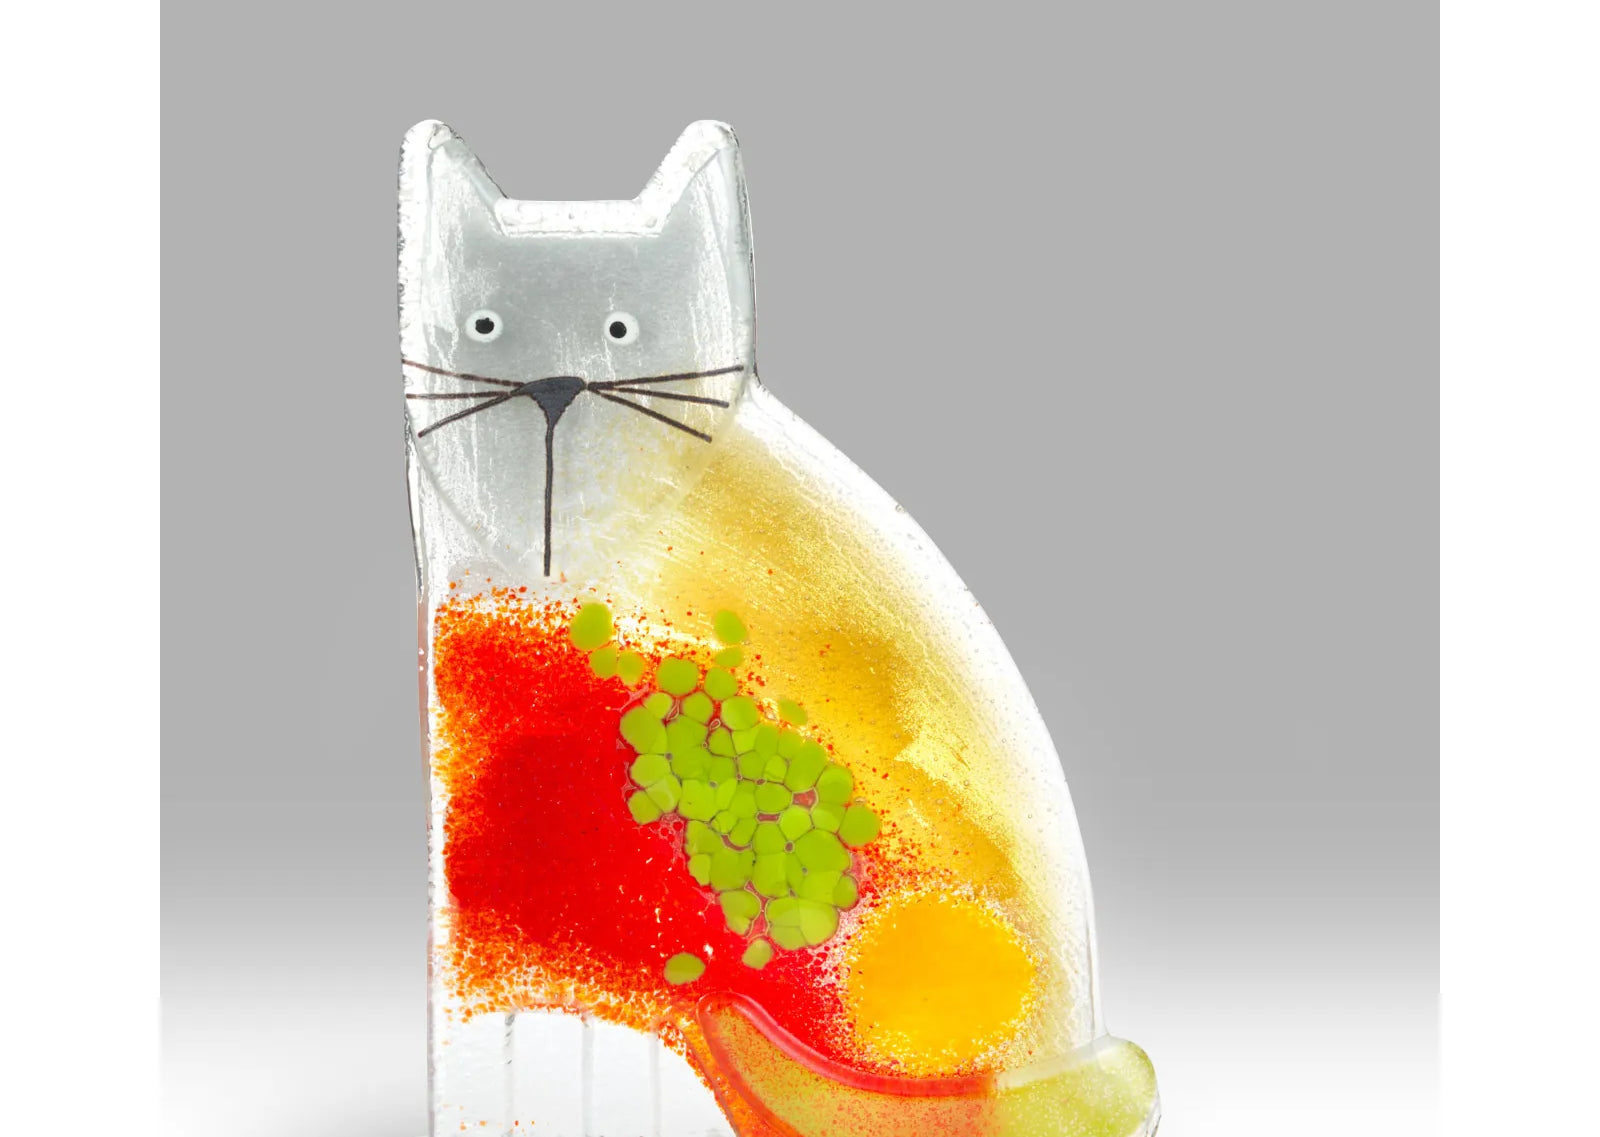 Fun Red And Yellow Glass Cat Ornament